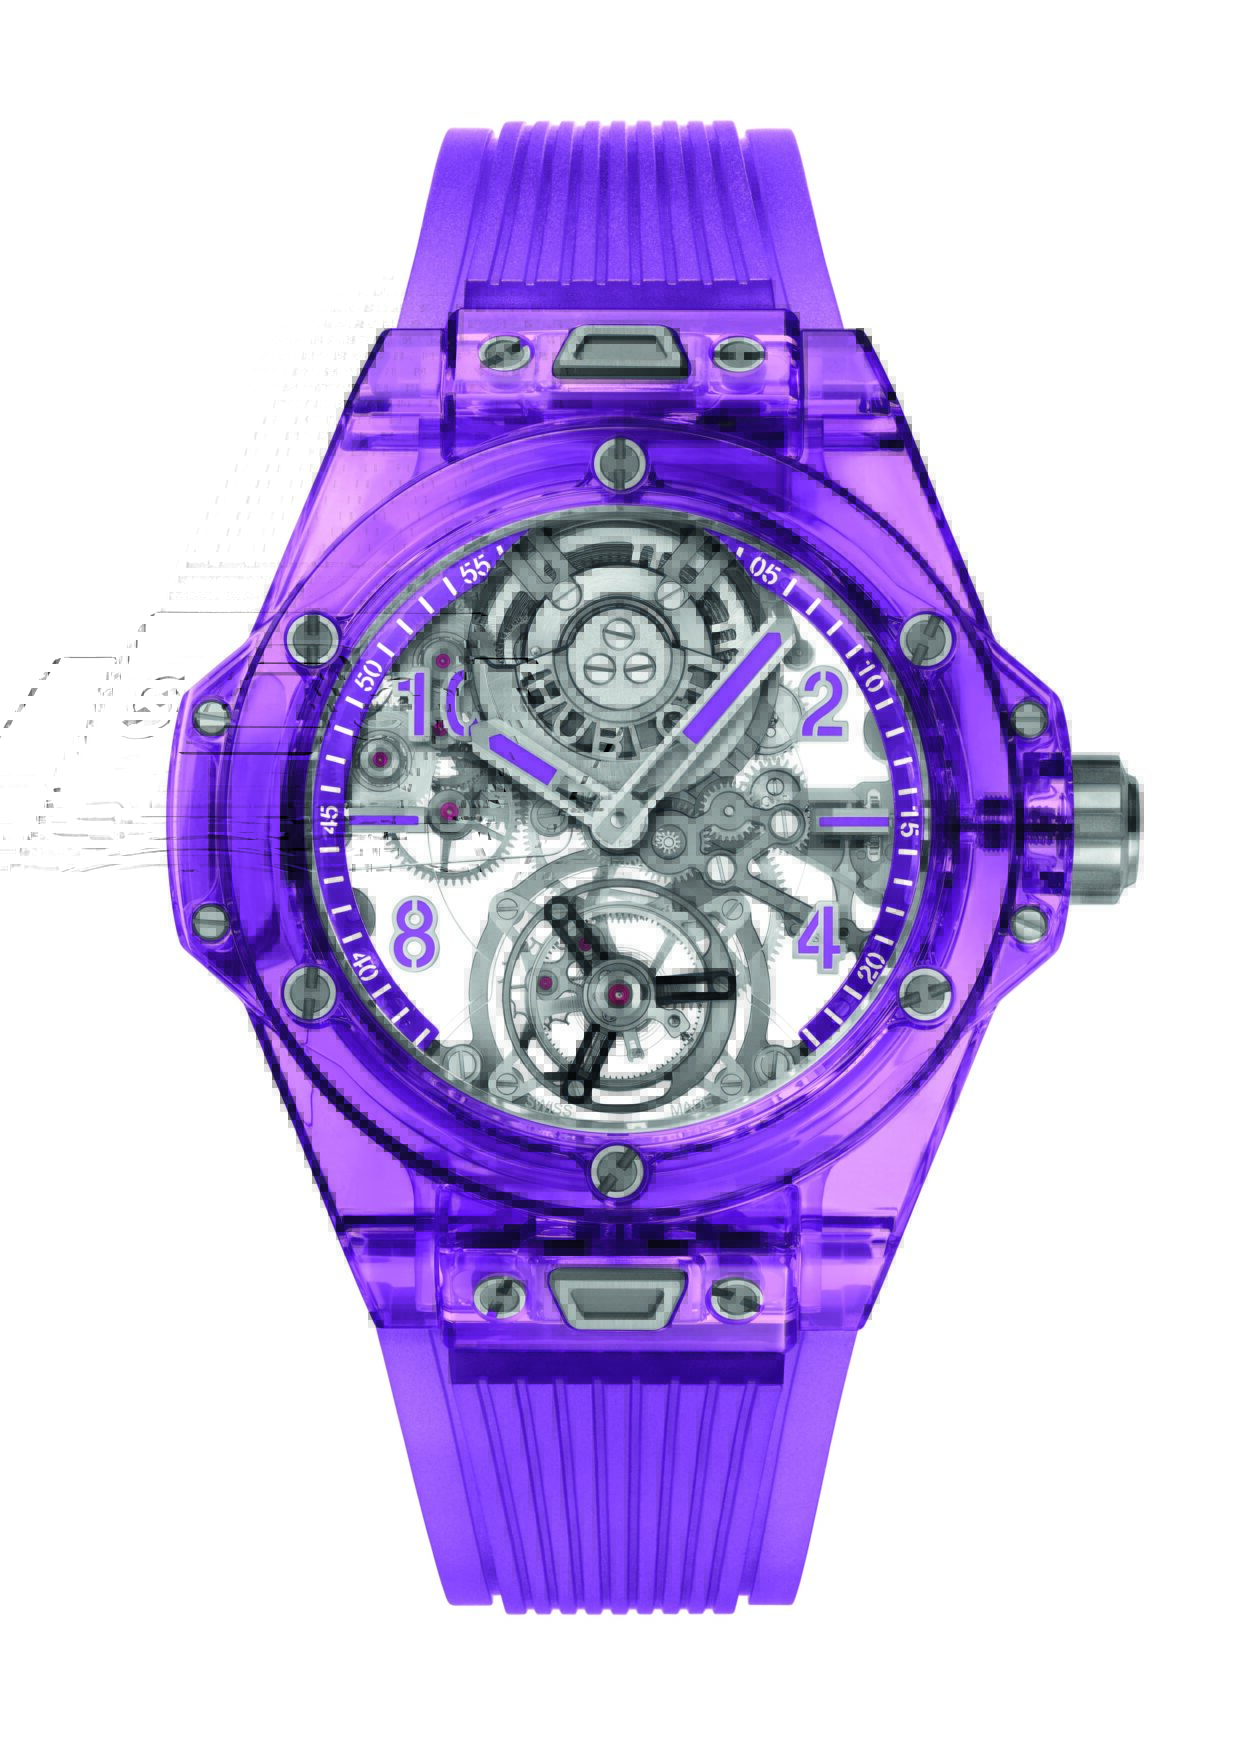 WATCHES & WONDERS: Hublot hit a purple patch and release a brand new case shape